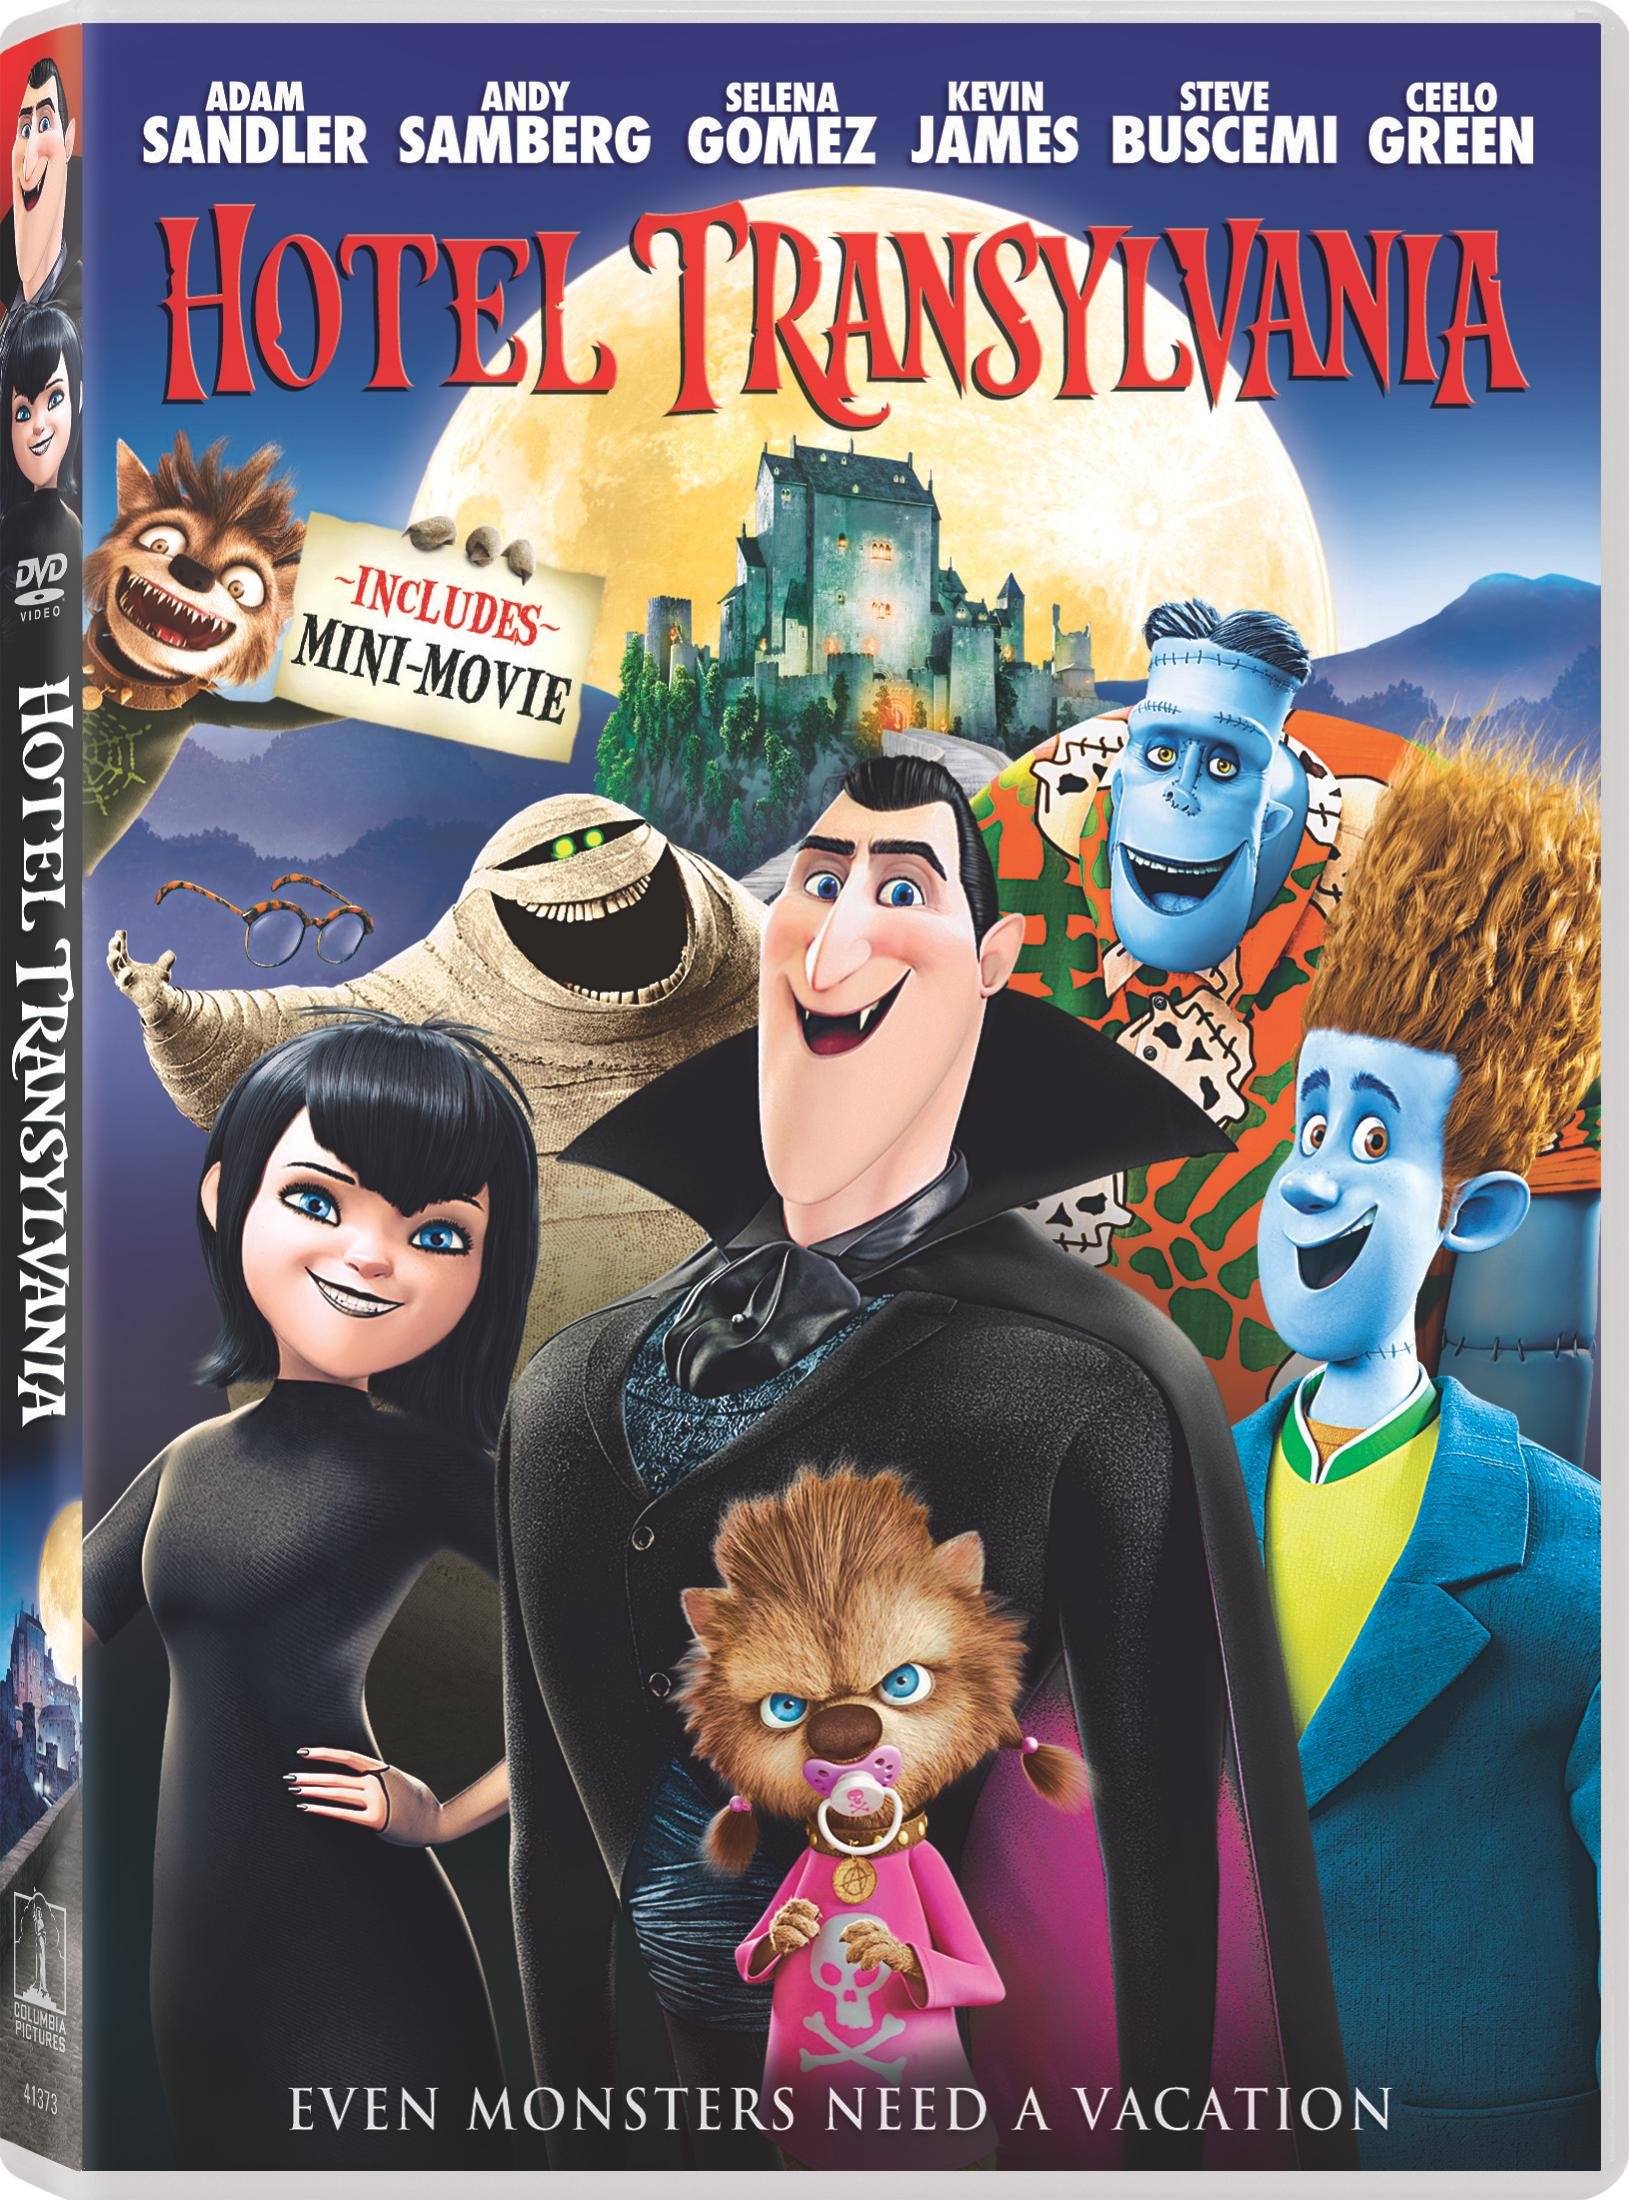 The Ultimate Hotel Transylvania Giveaway